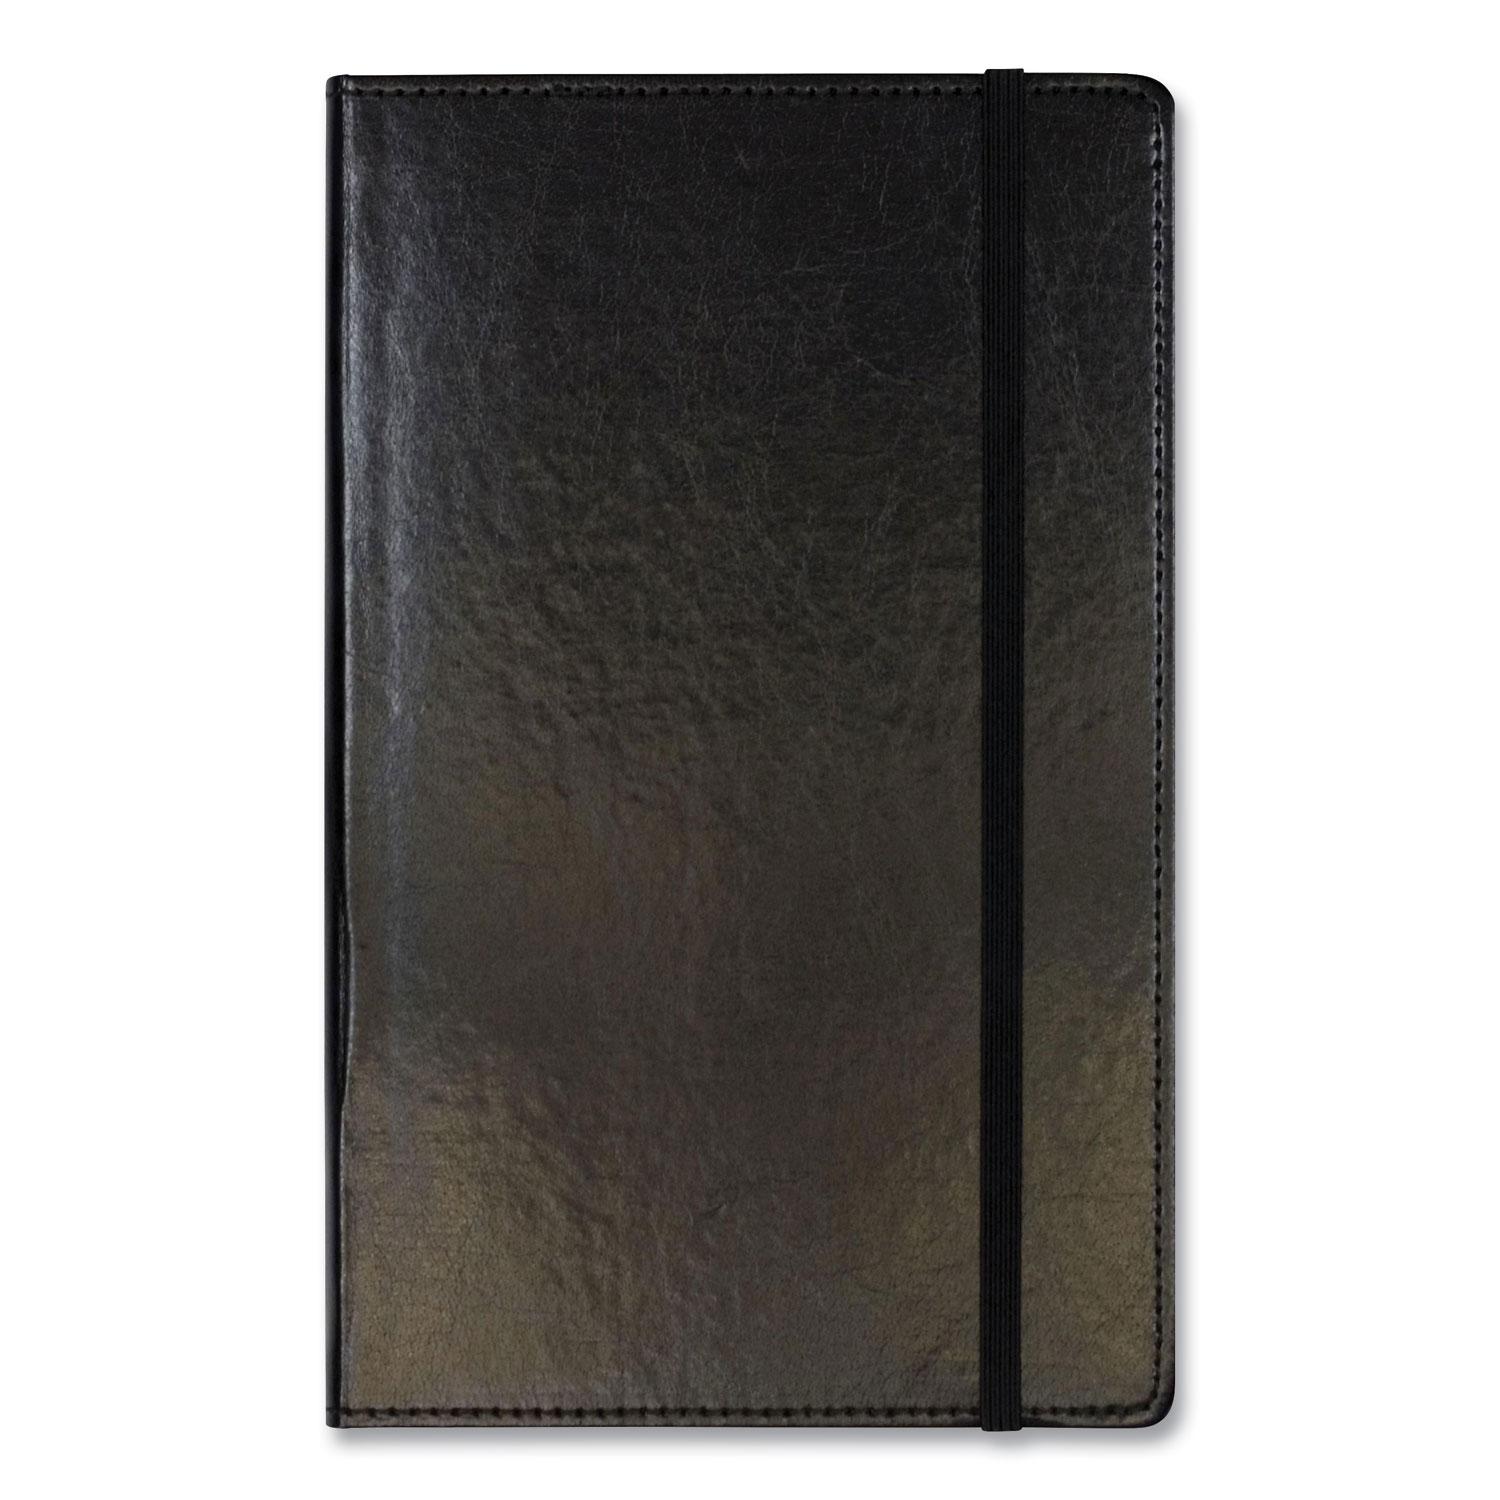 Markings® by C.R. Gibson Bonded Leather Journal, Black, 5 x 8.25, 240 Ivory Colored Pages